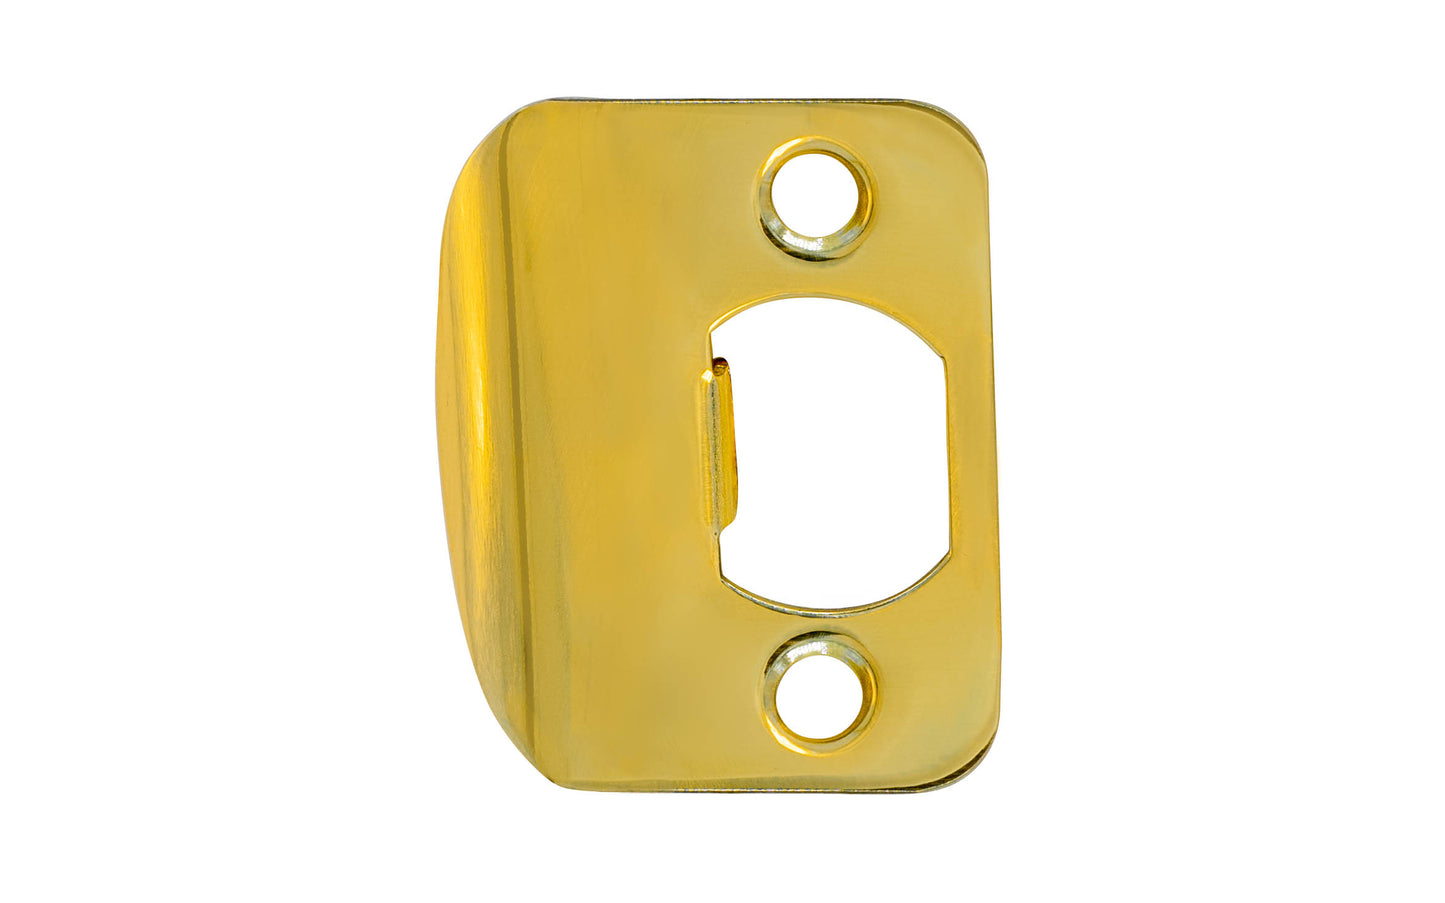 Vintage-style Hardware · Traditional & classic-style ~ For interior doors ~ Classic & traditional lacquered brass full lip door strike made of quality solid brass material. 2-1/4" High x 1-3/4" Wide overall size. Available in five different finishes. Includes two phillips flat-head screws